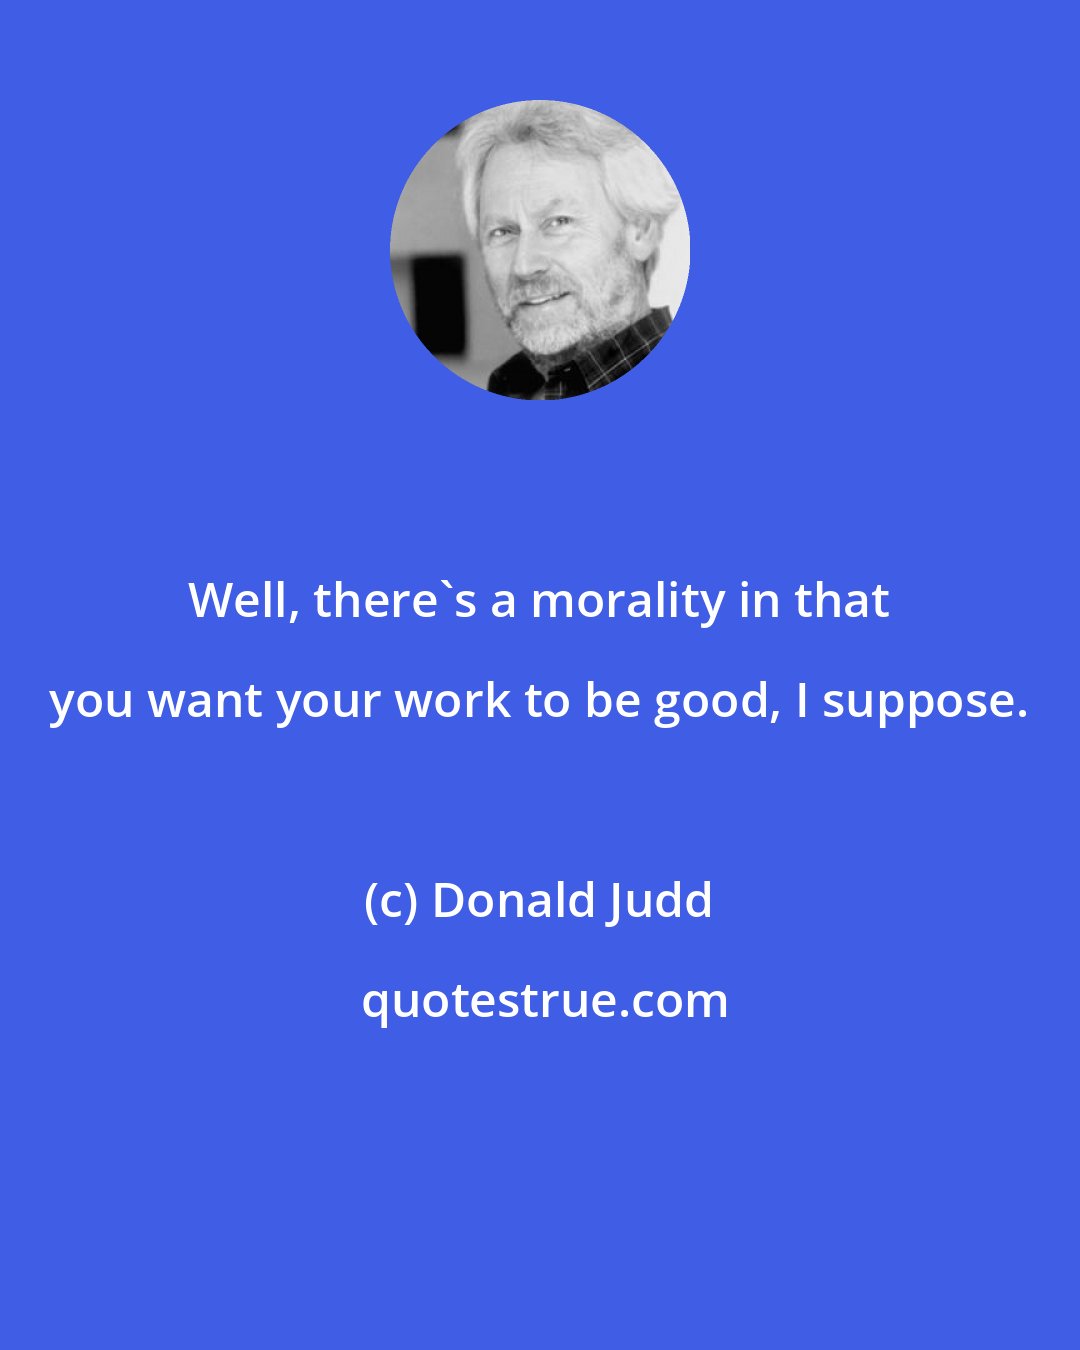 Donald Judd: Well, there's a morality in that you want your work to be good, I suppose.